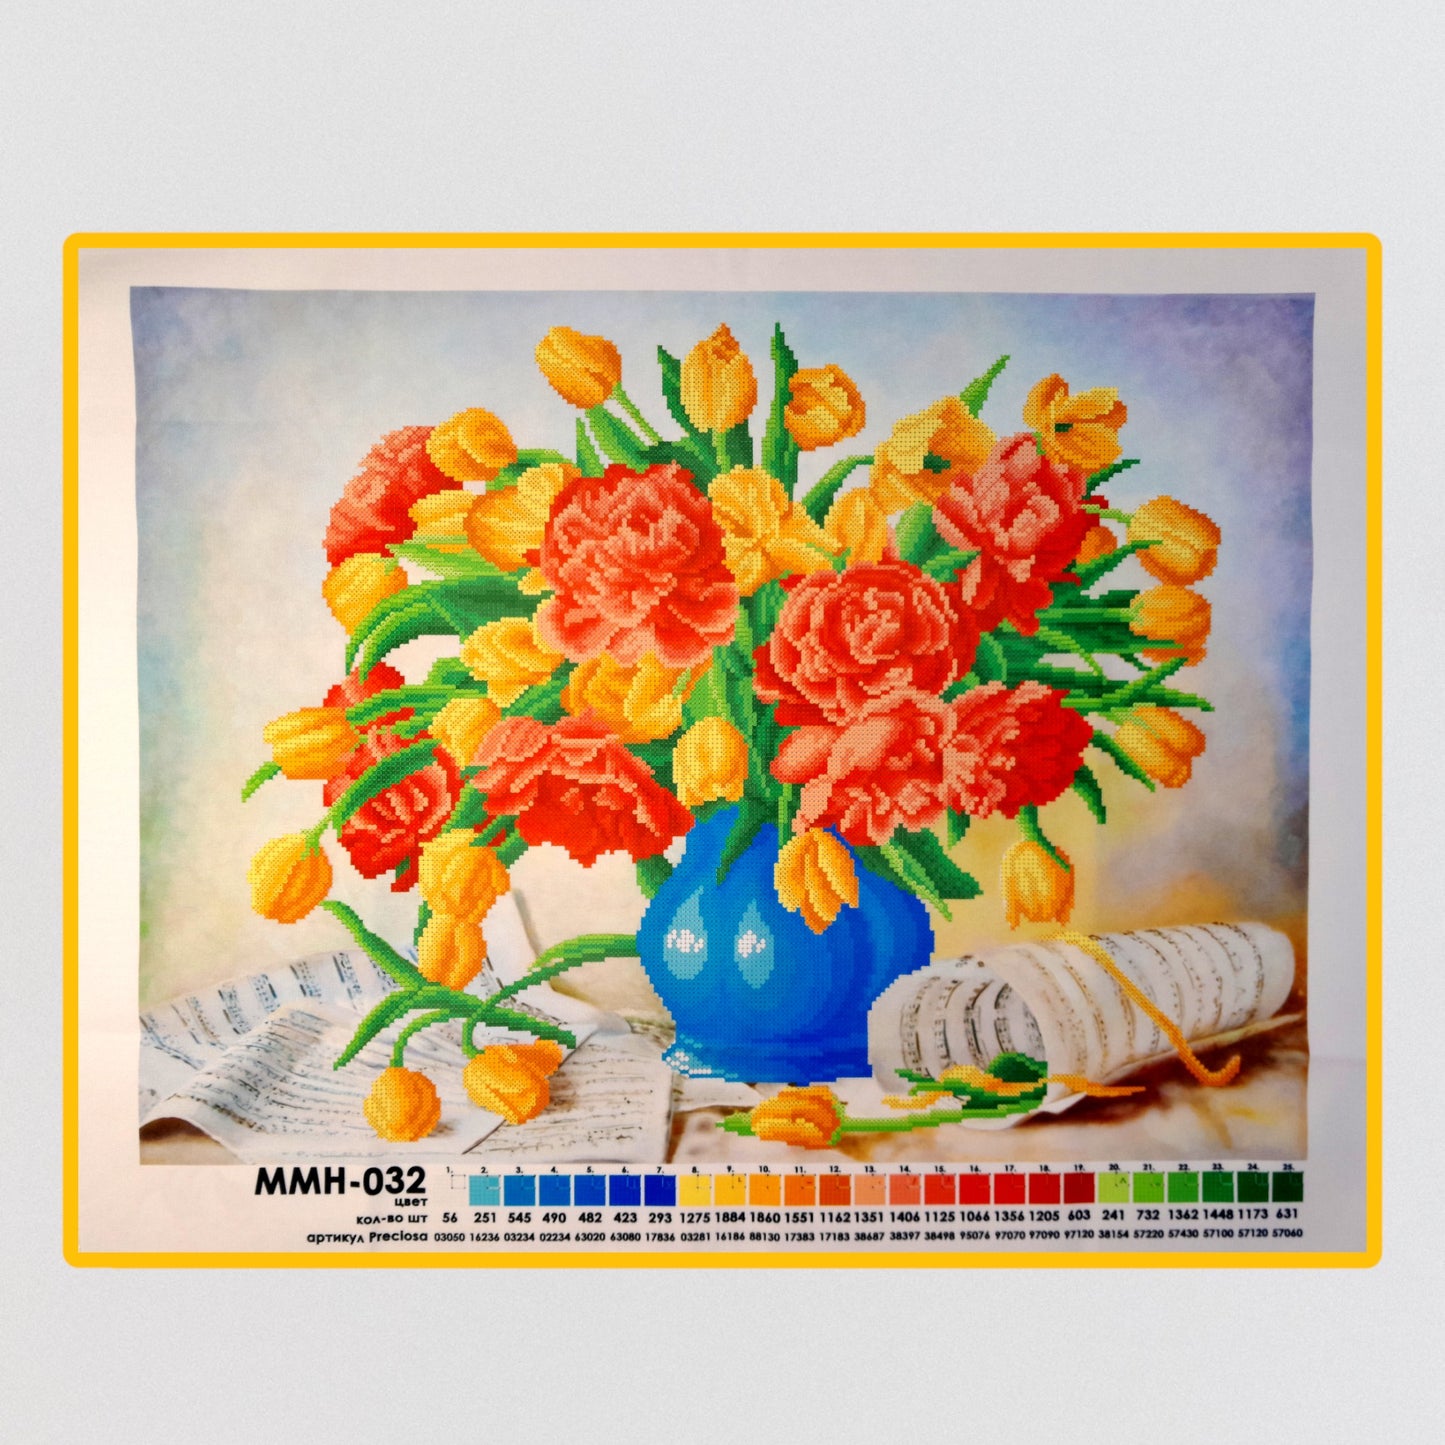 DIY Bead embroidery kit "Flowers''. Size: 21.7-16.1 in (55-41cm) - VadymShop